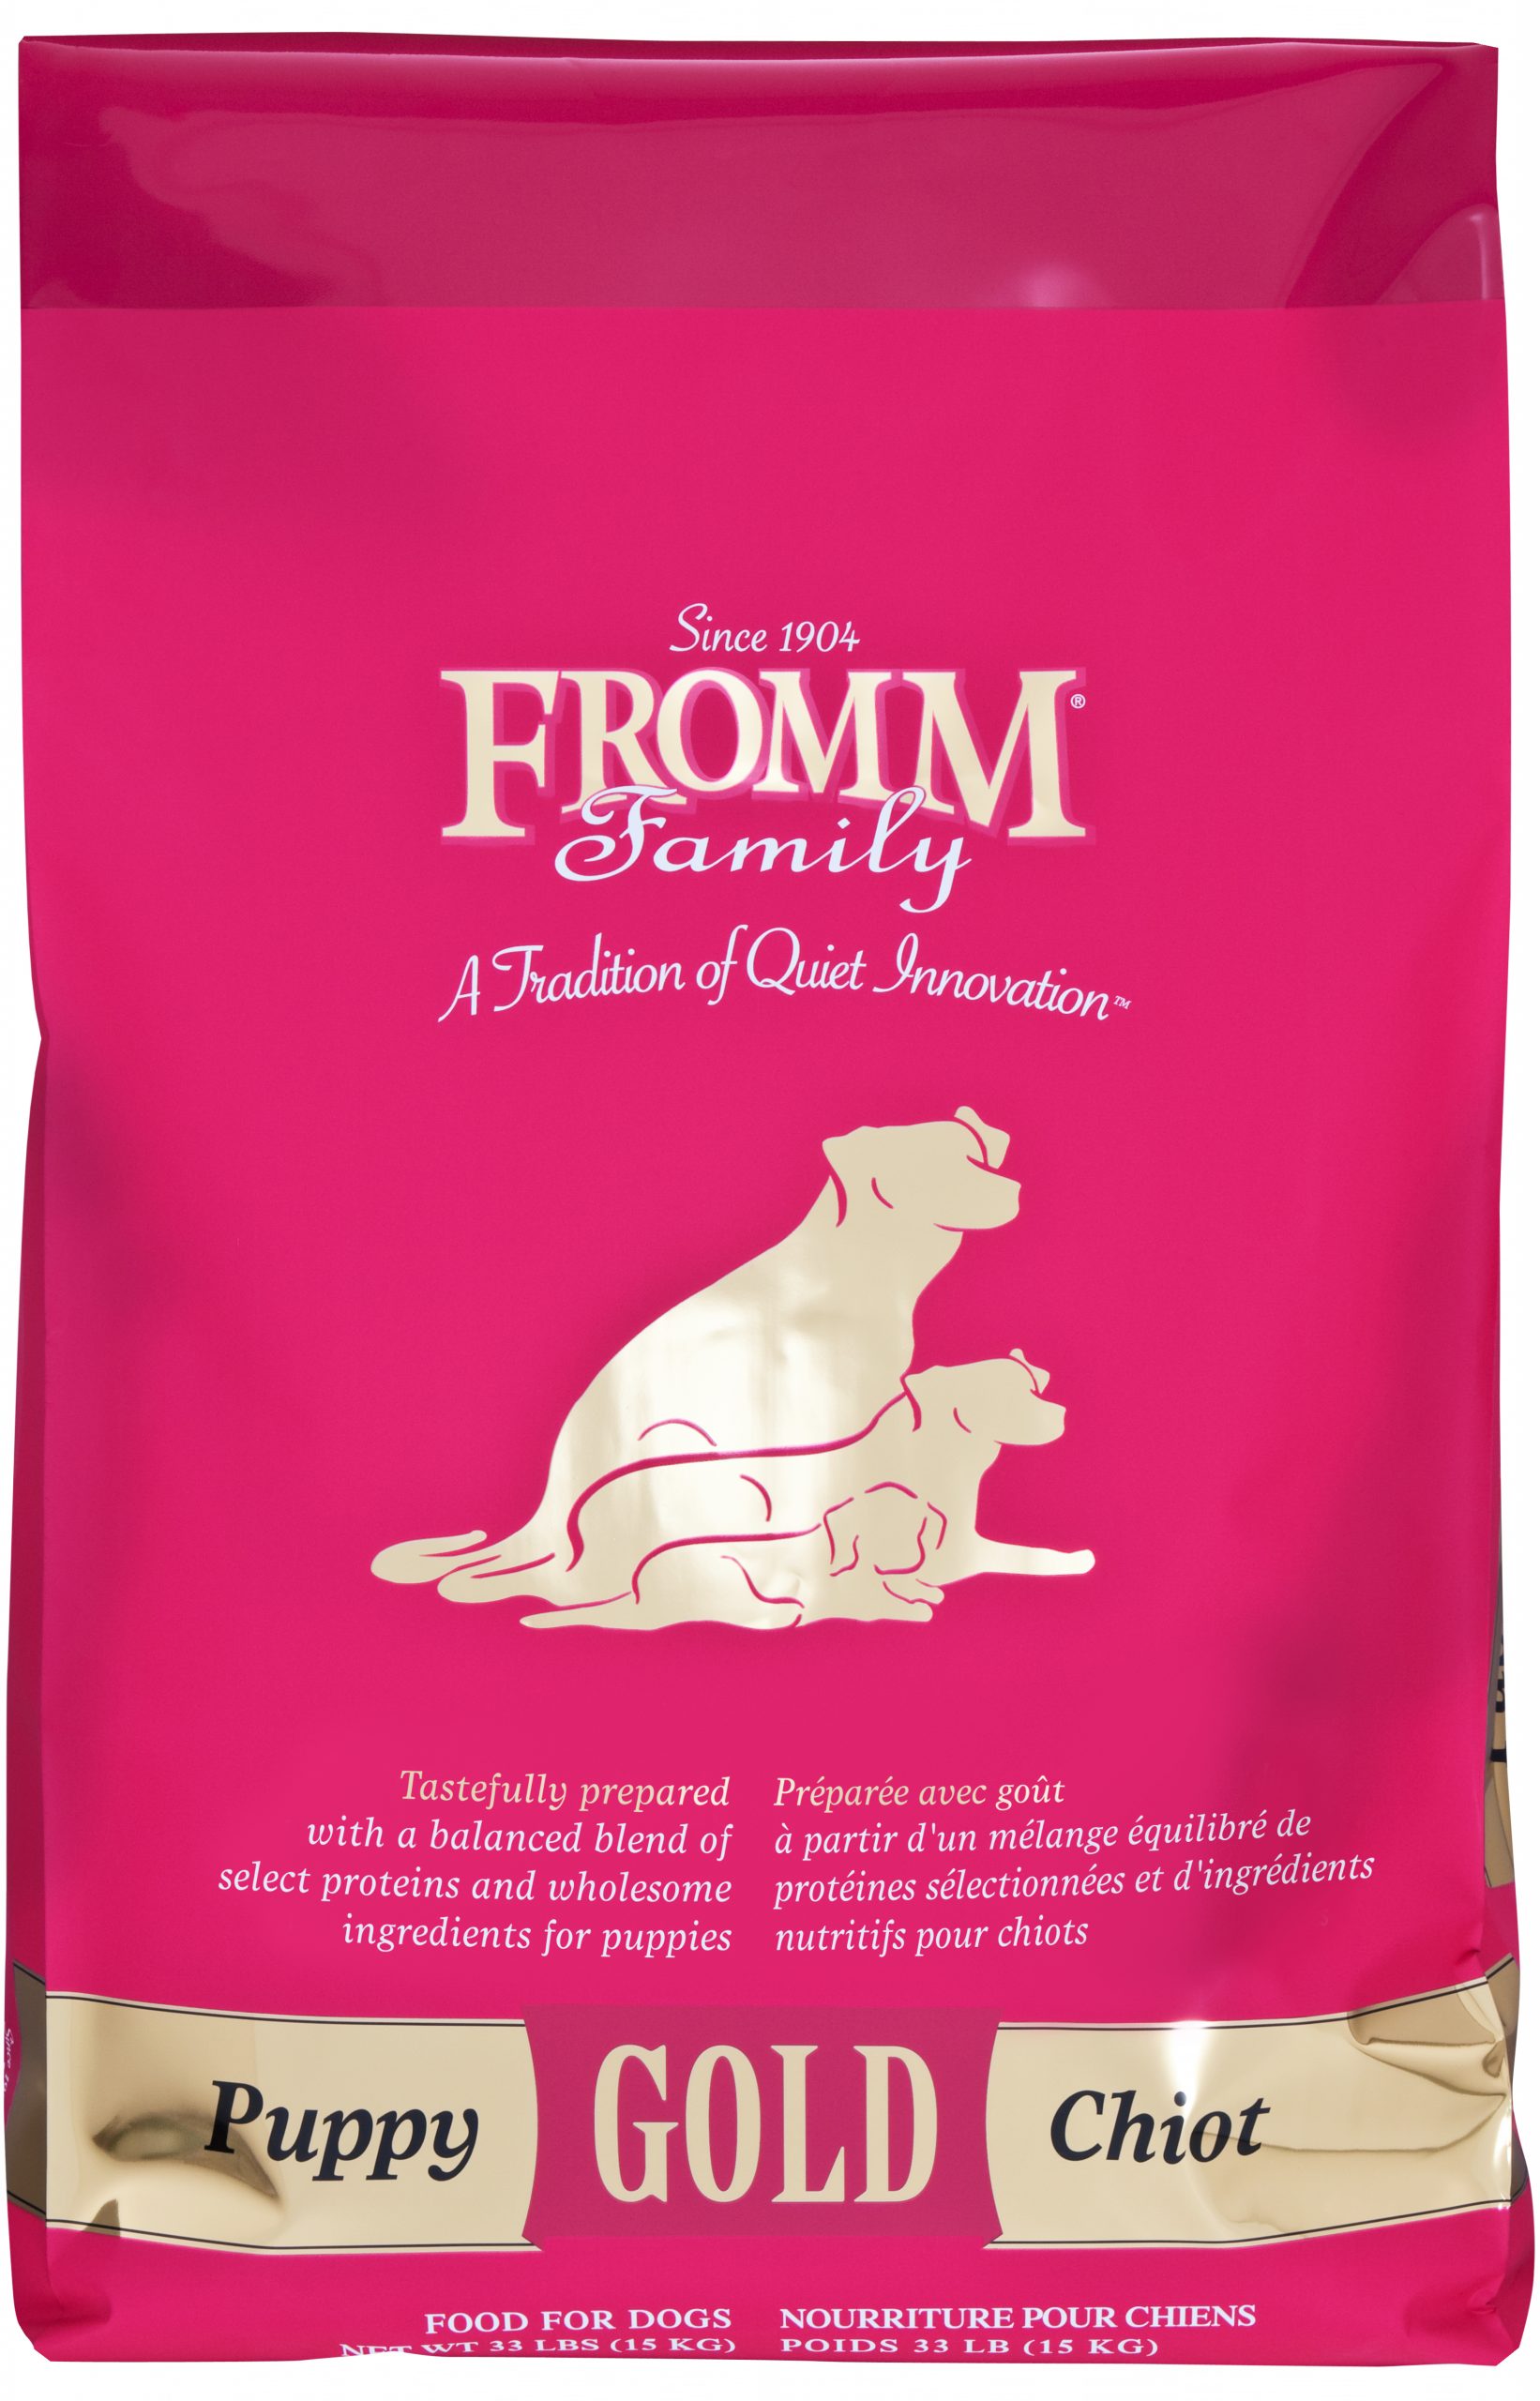 29 HQ Pictures Fromm Puppy Gold Dog Food : Fromm Gold Dog Food - Fidos Pantry